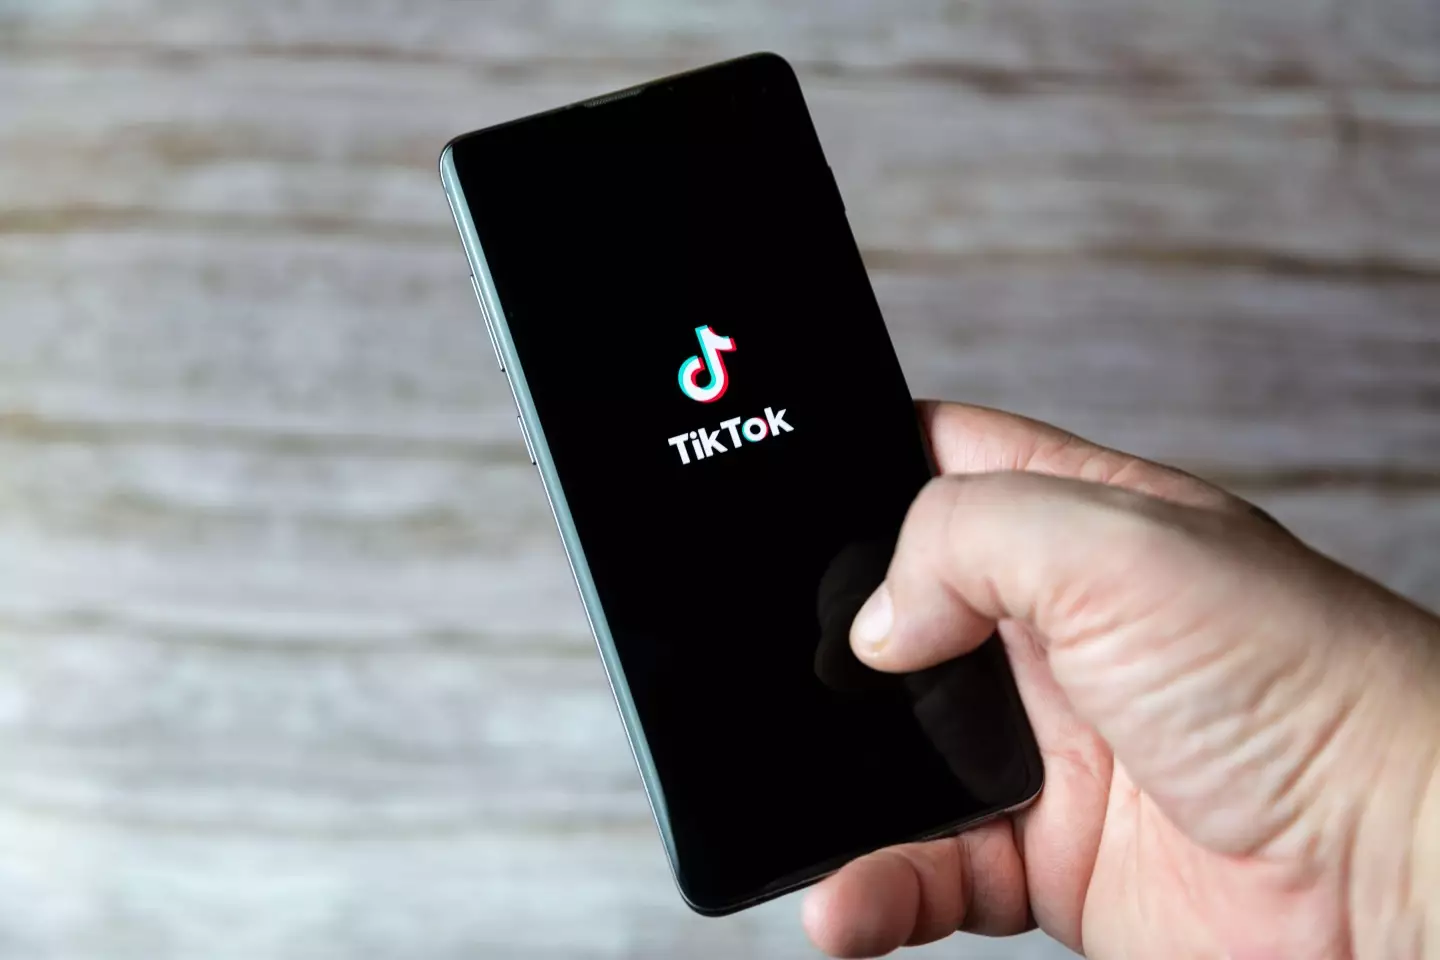 16 percent of teens said they use TikTok 'constantly'.